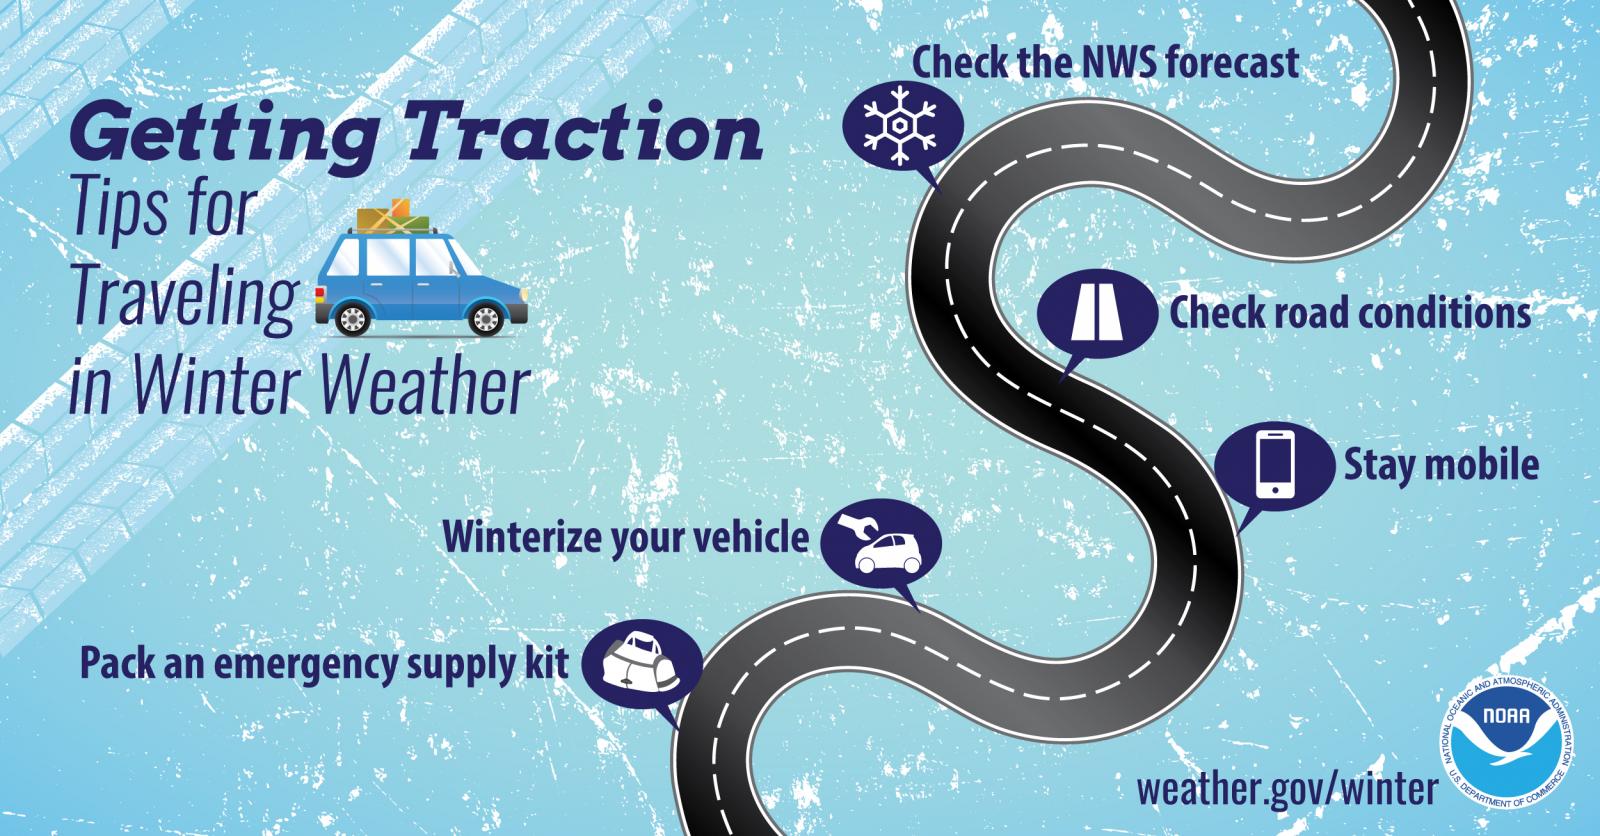 Getting Traction - Tips for Traveling in Winter Weather